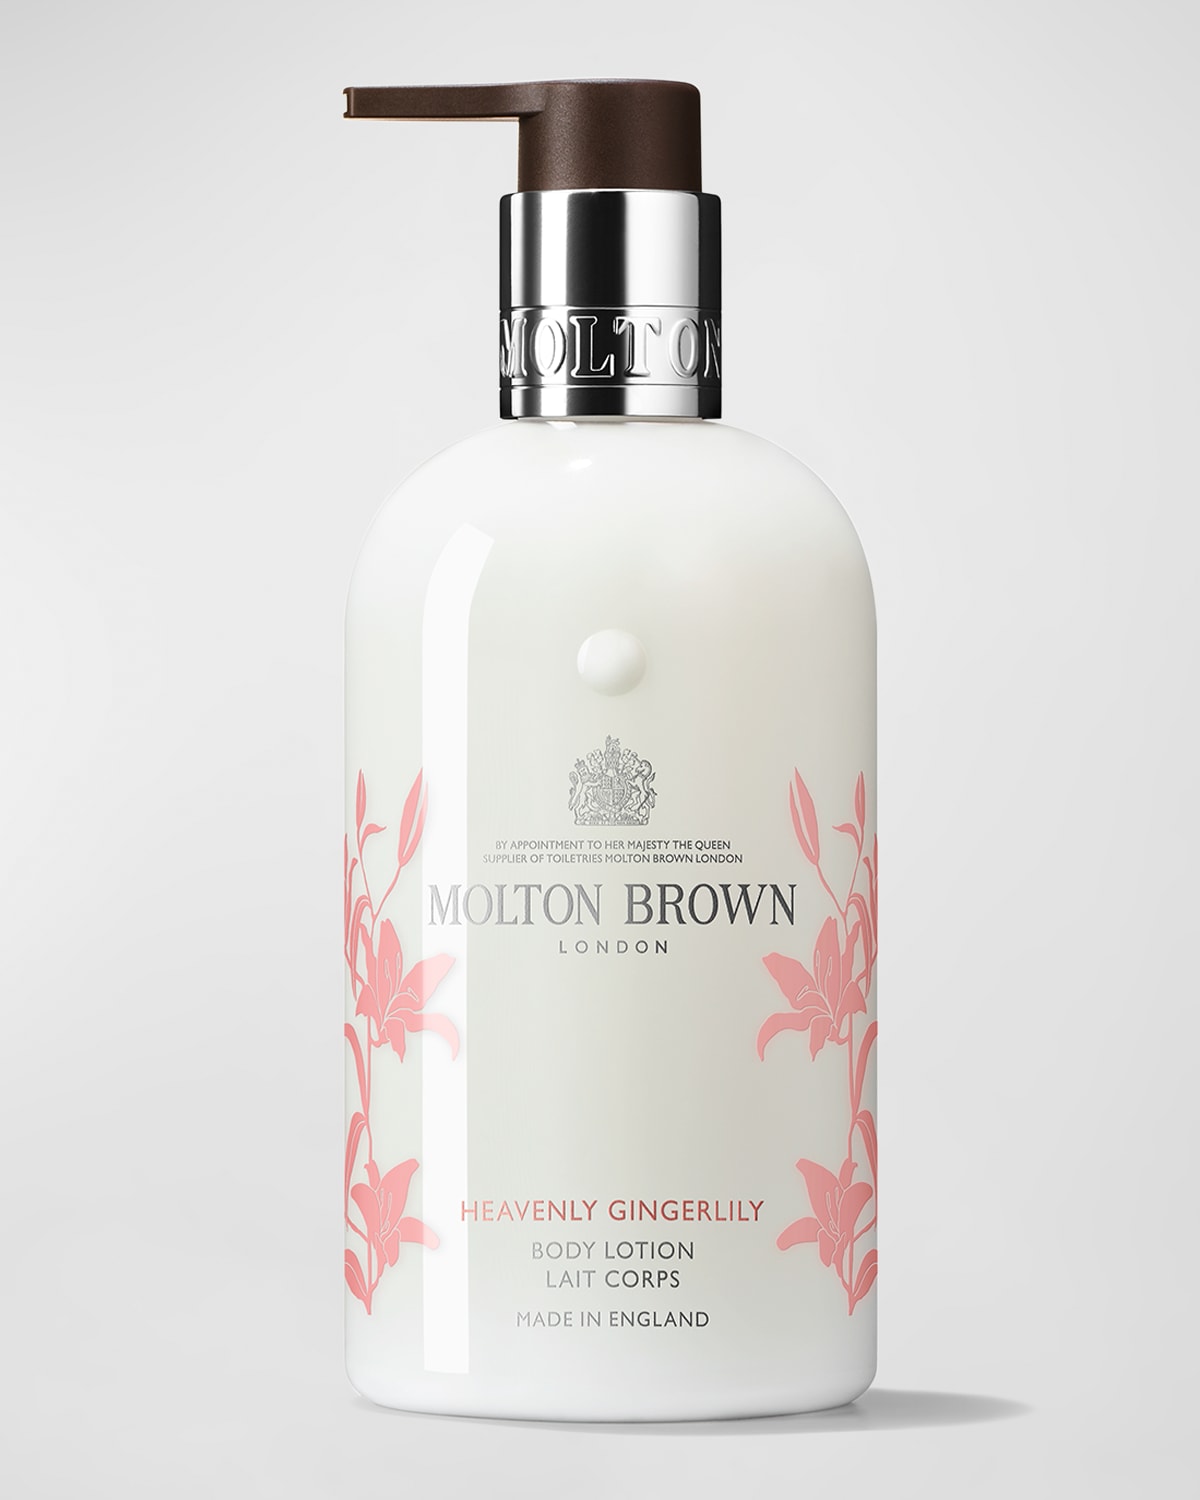 Heavenly Gingerlily Body Lotion, 10 oz. - Limited Mother's Day Edition